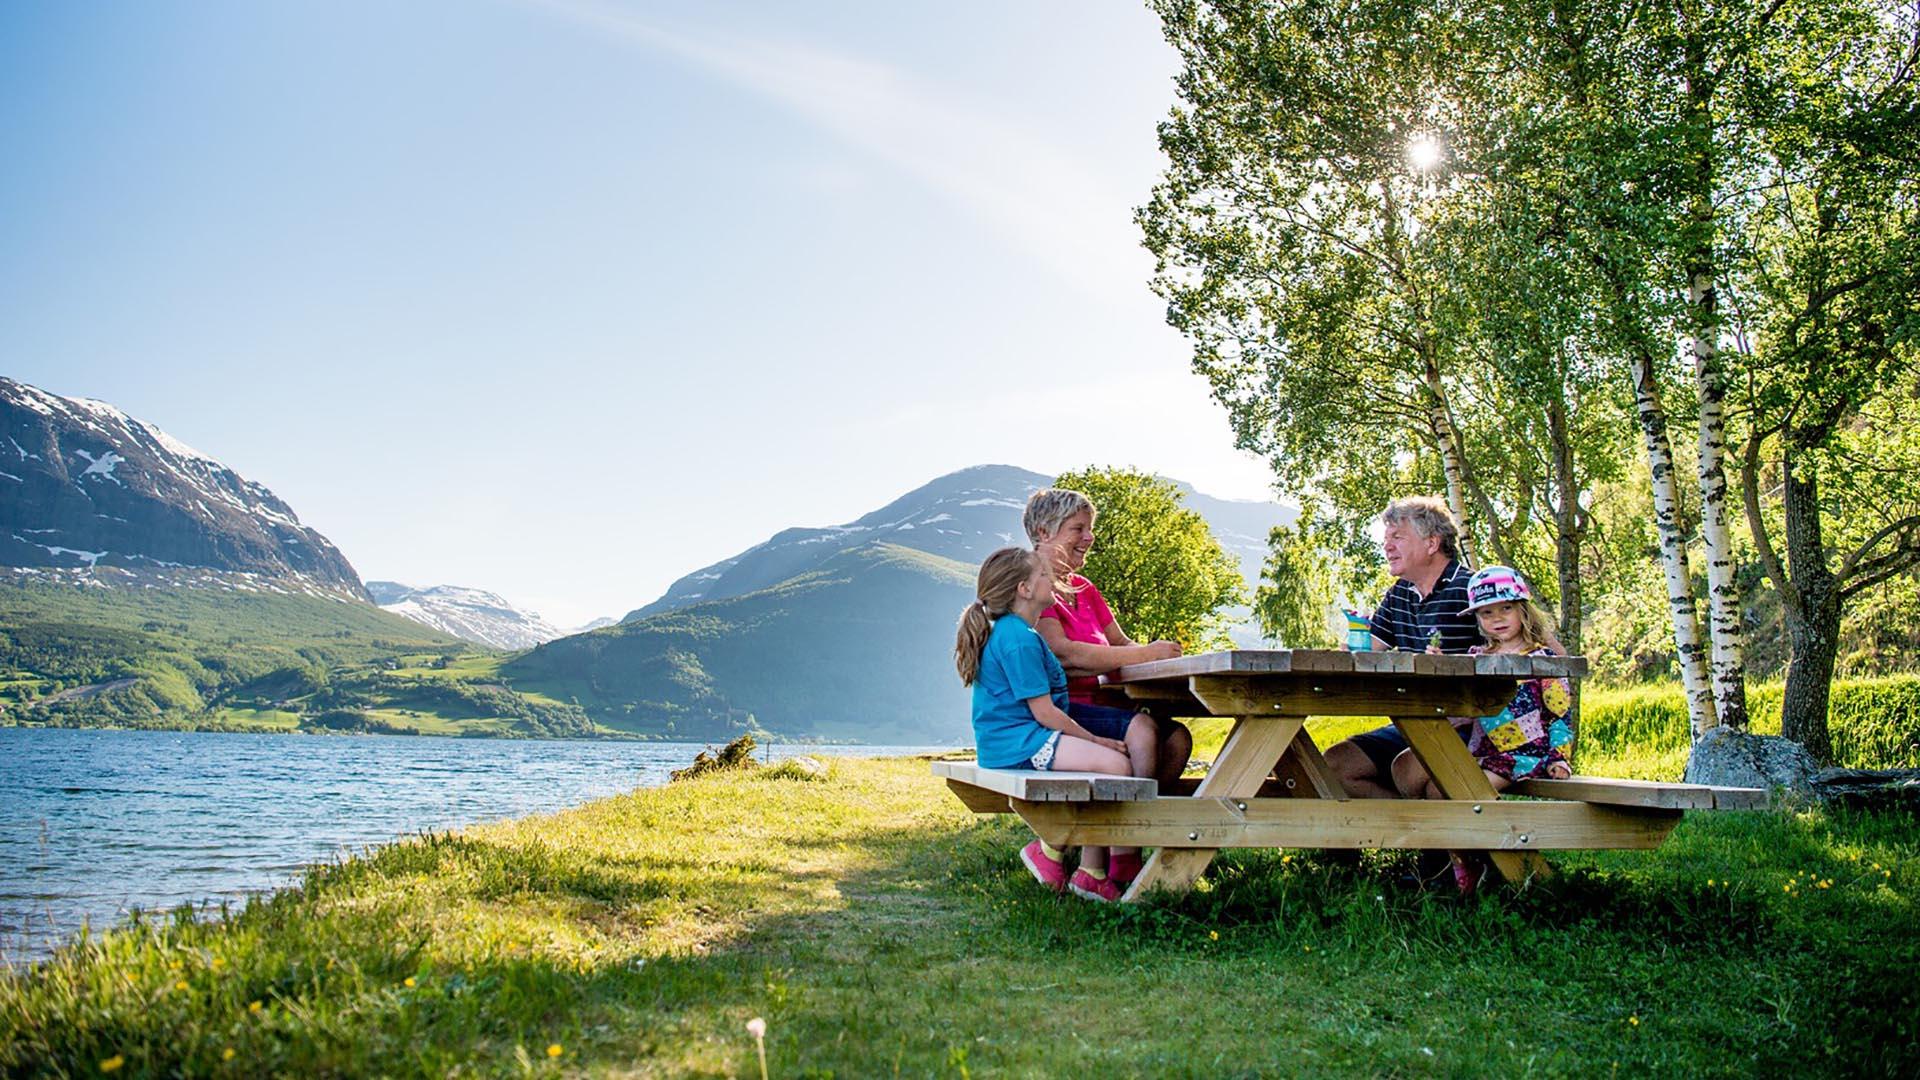 A family sits at a wooden table with benches on a grass-overgrown rest area by a lake under a birch tree. In the background mountains rise.